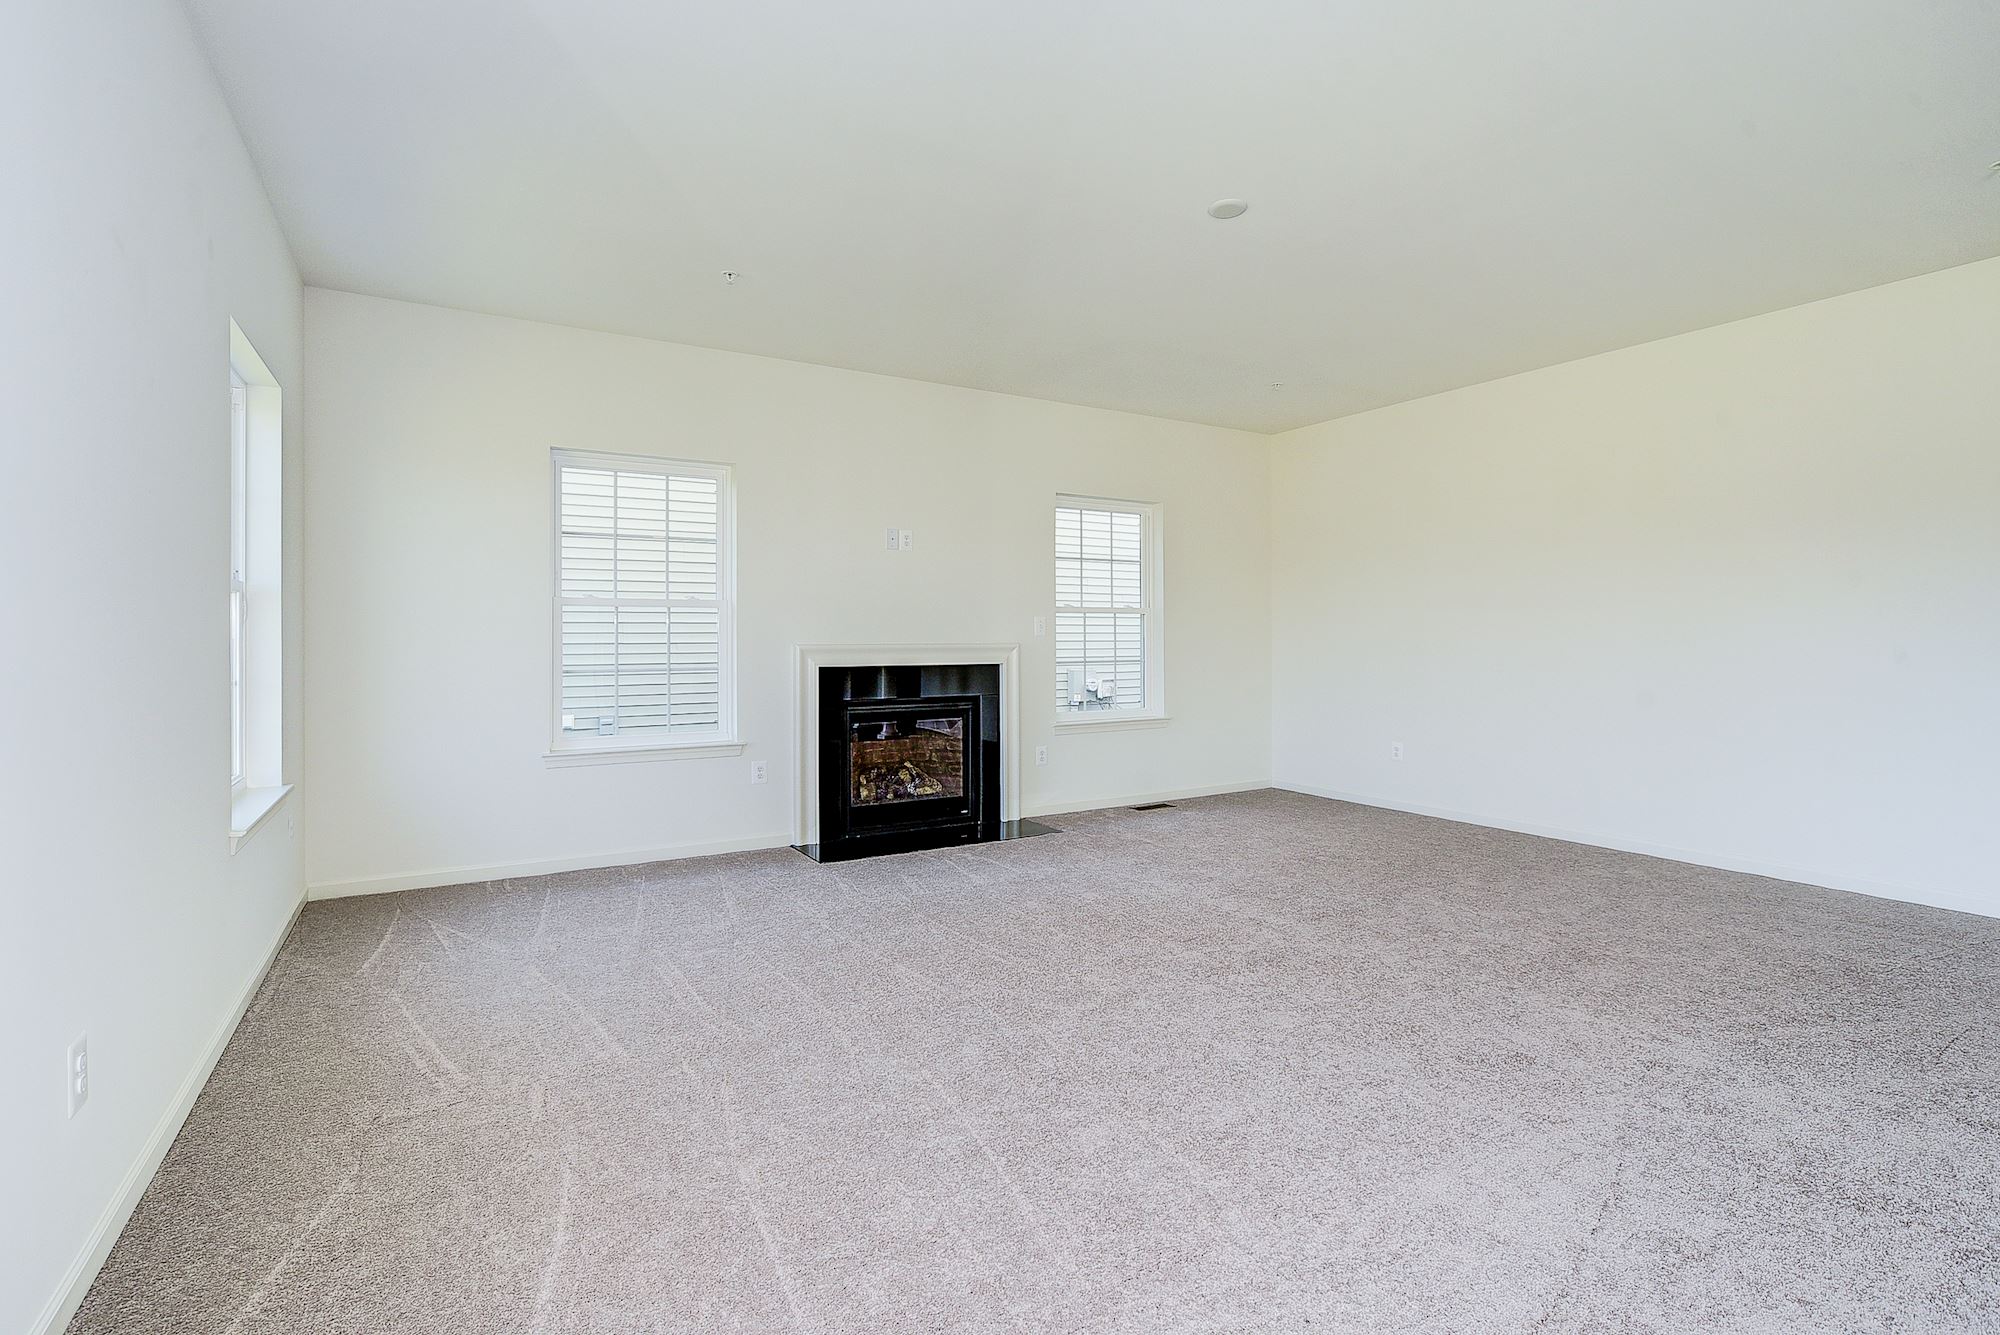 Fireplaces Photos. New Homes in Central Maryland